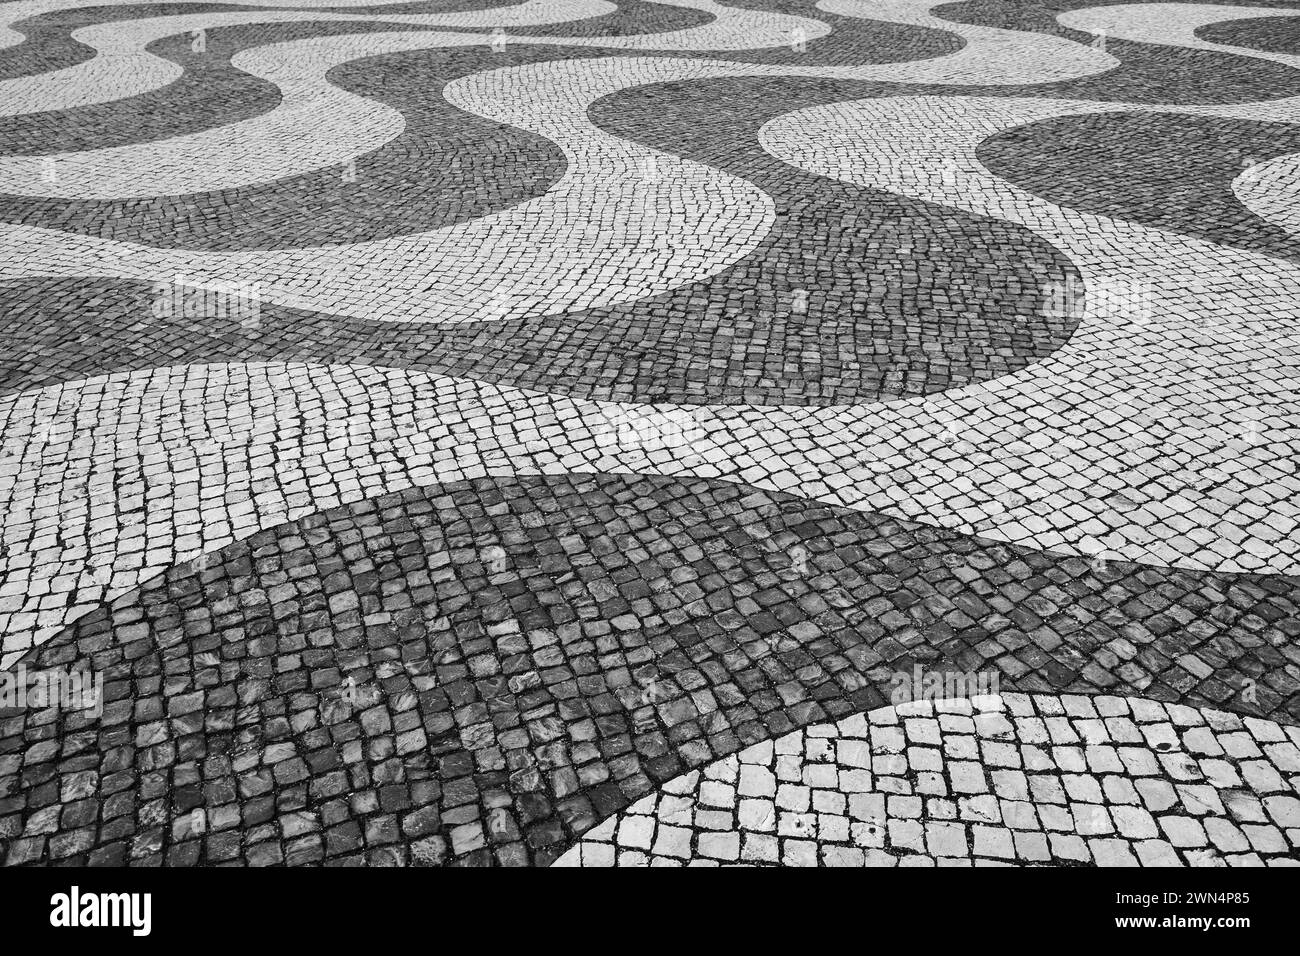 Typical Portuguese mosaic cobble stone paving in Lisbon, Portugal, black and white. Stock Photo